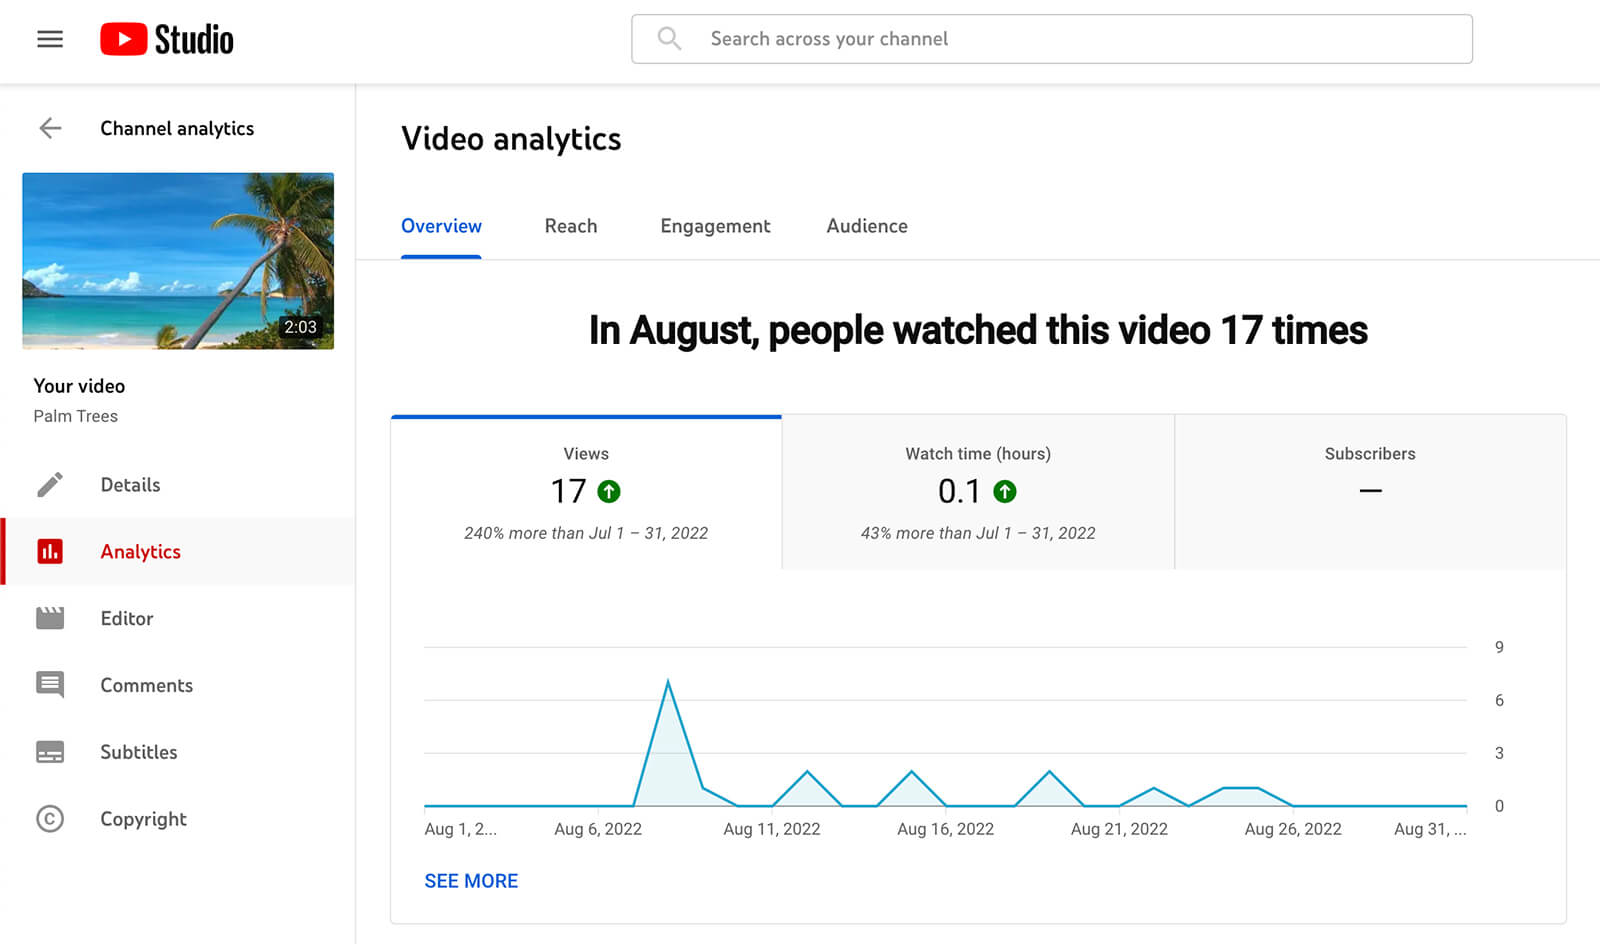 how-to-use-youtube-studio-channel-level-content-analytics-video-metrics-overview-reach-engagement-example-9